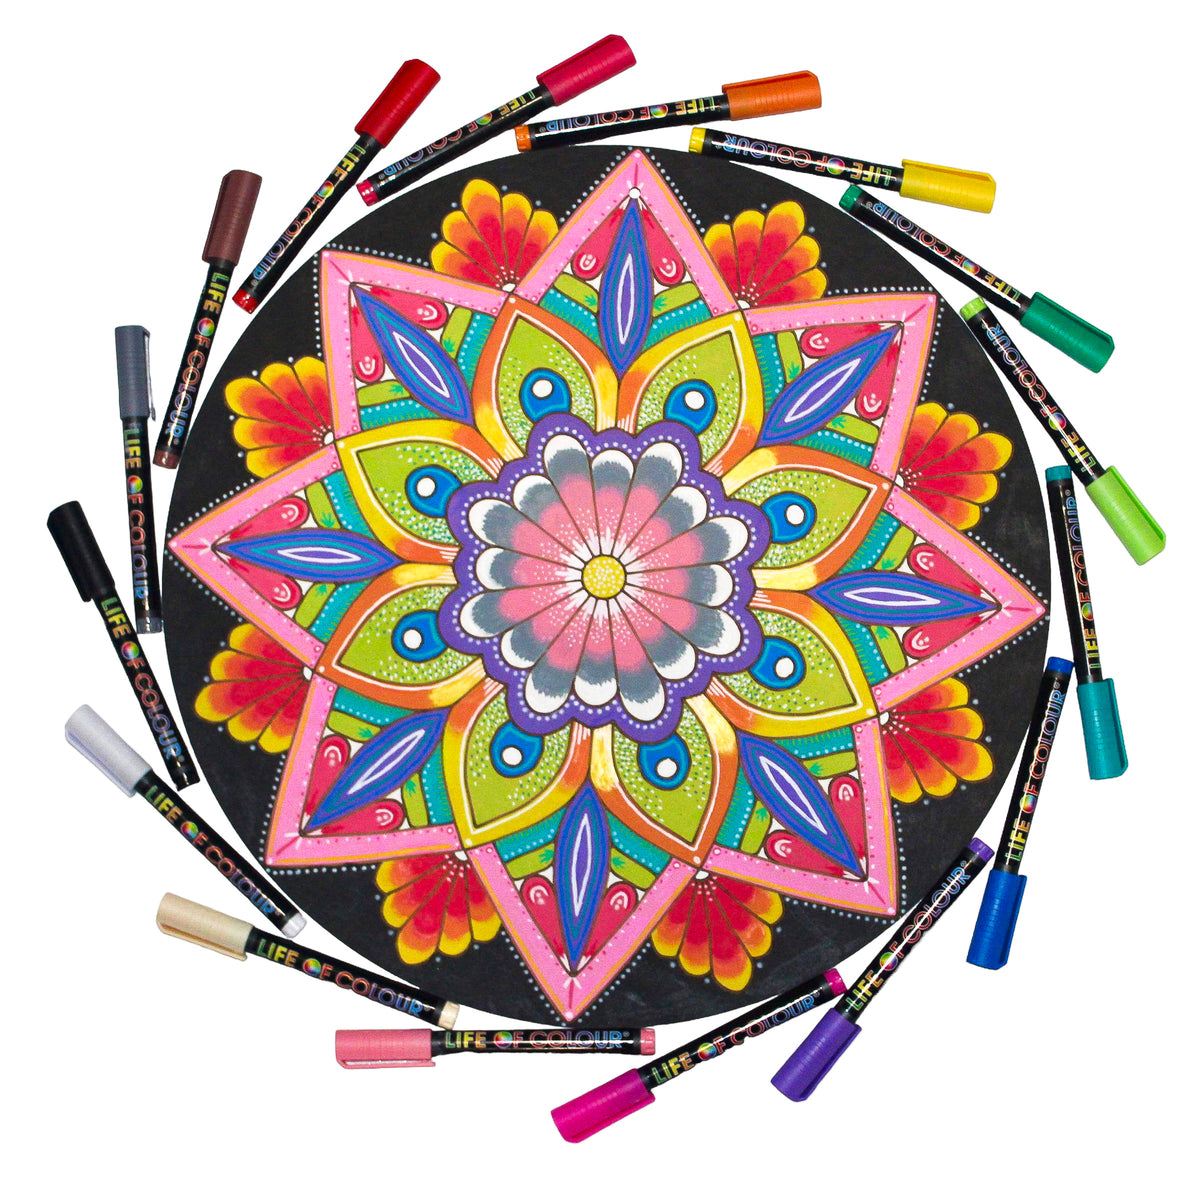 Life of Colour Mandala Painting Kit - In Bloom (Essentials)